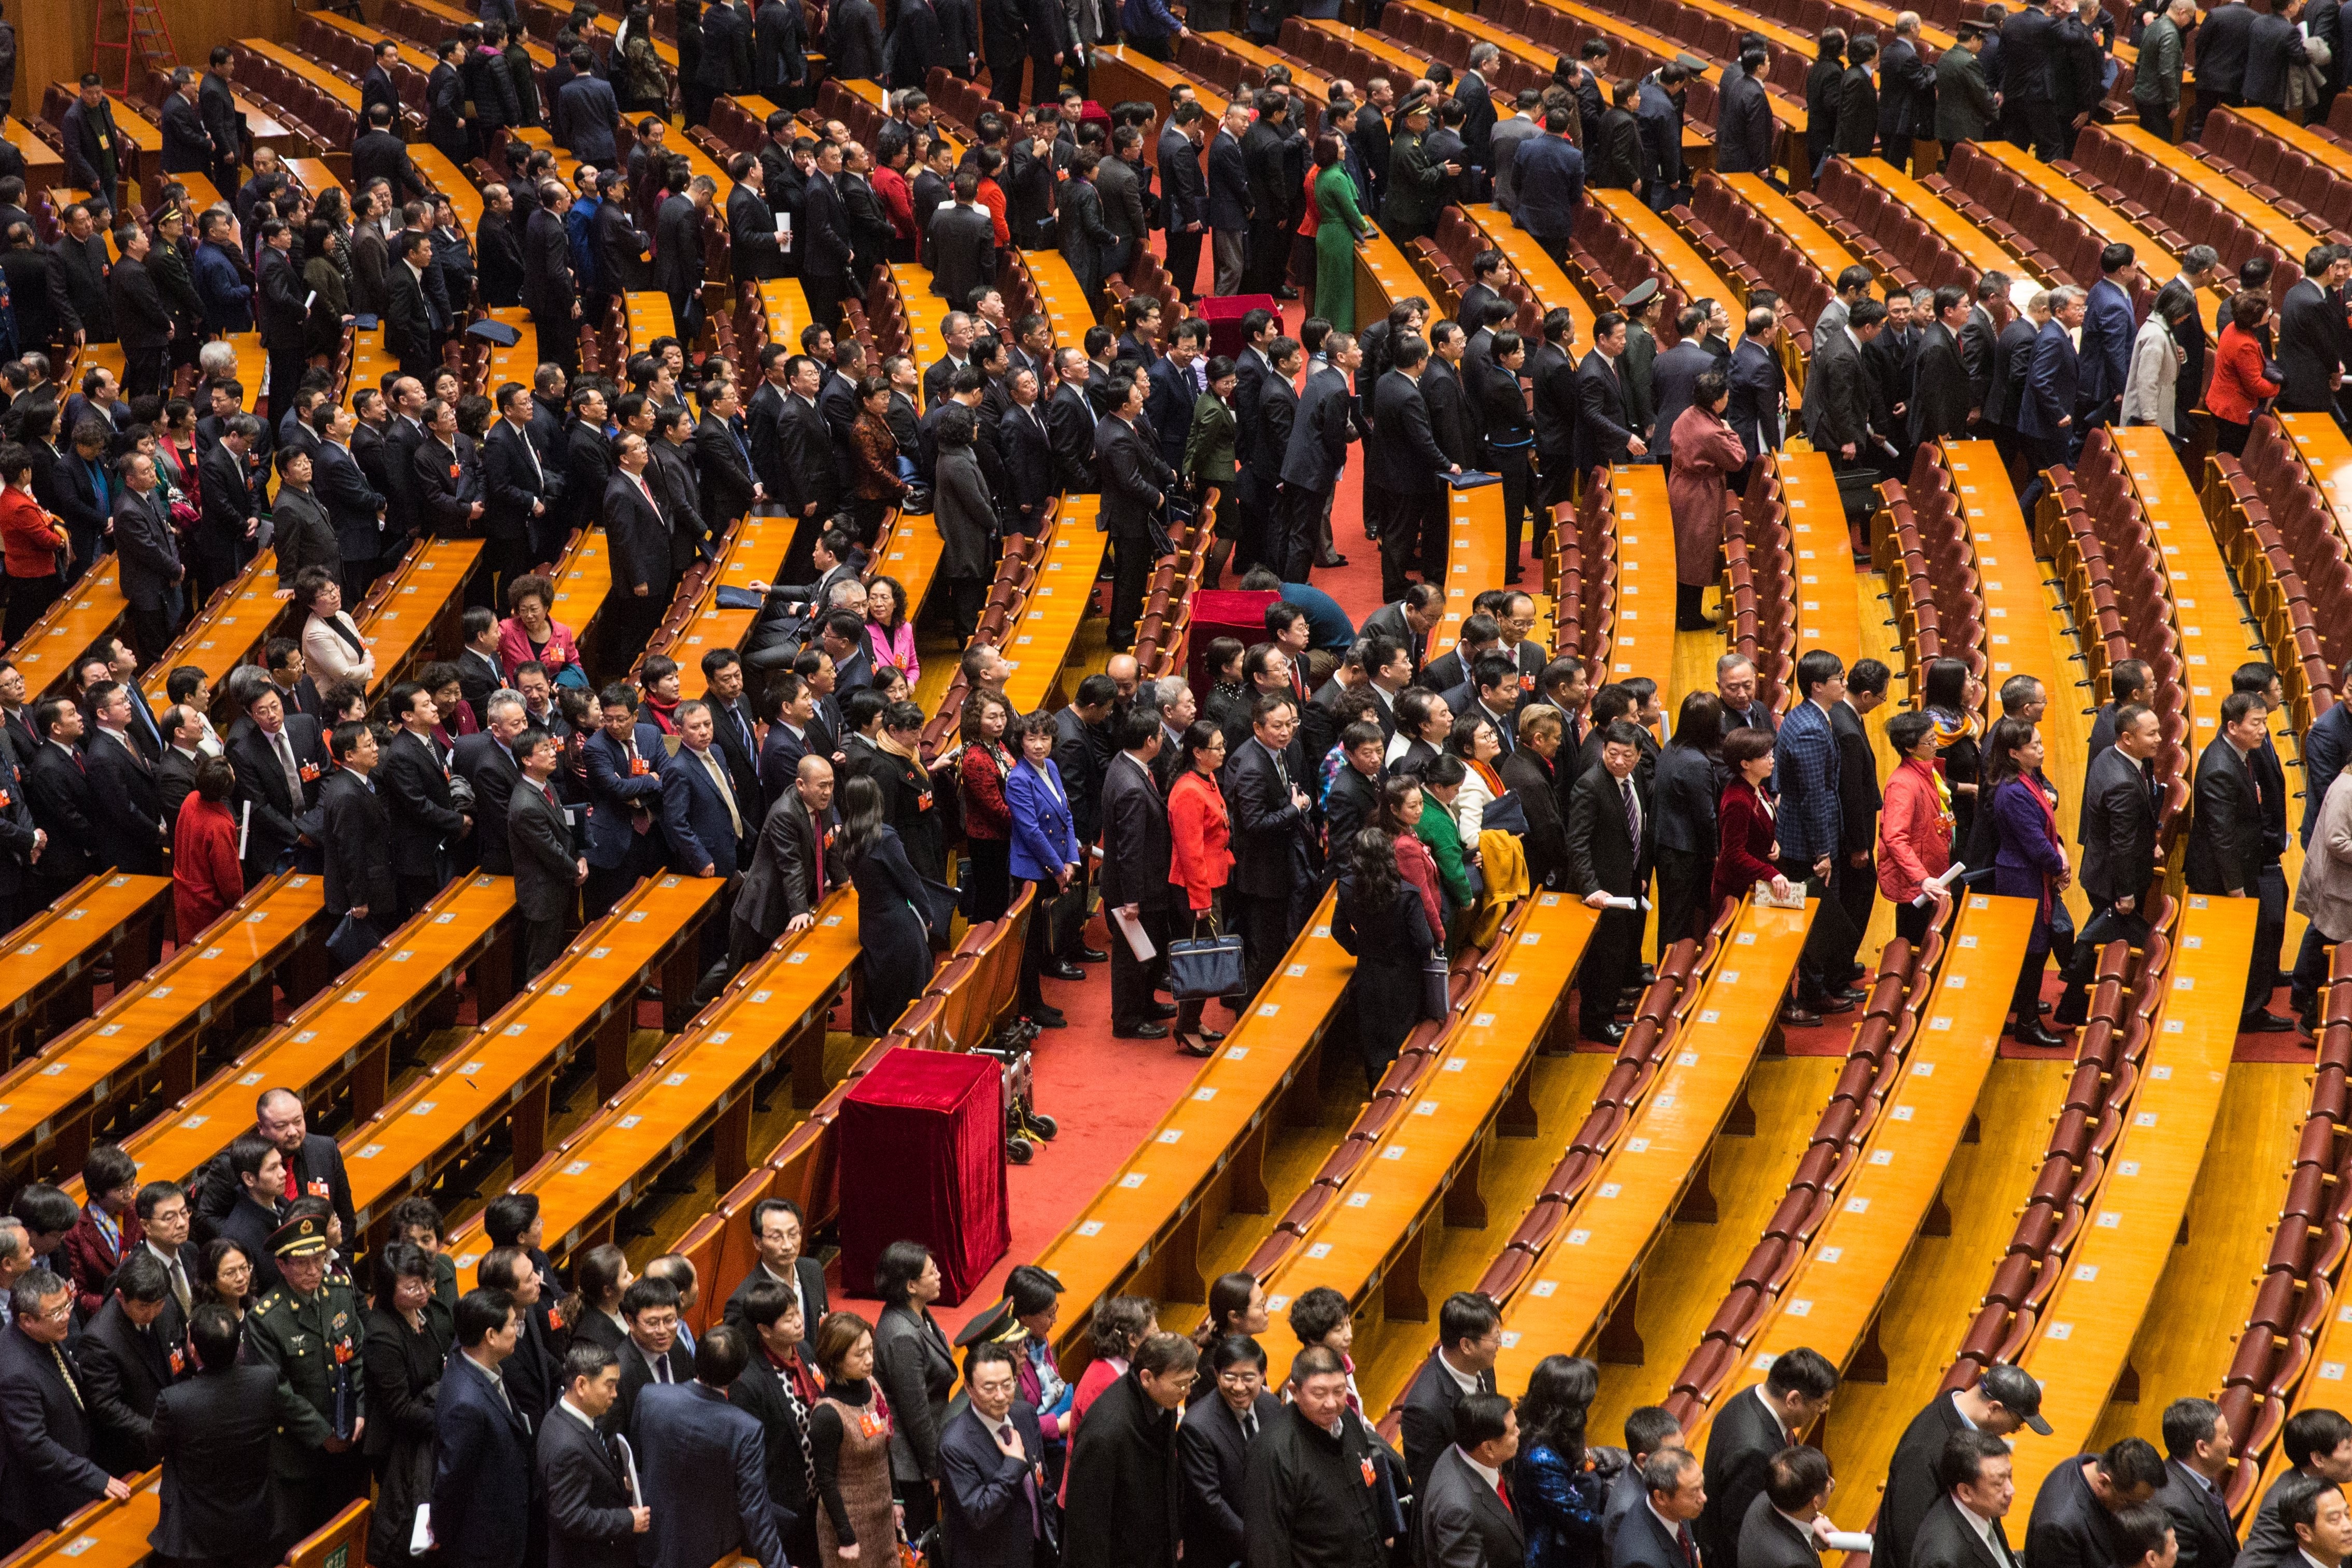 Delegates file out of the Great Hall of the People after the opening session of the CPPCC on Saturday. Photo: EPA-EFE